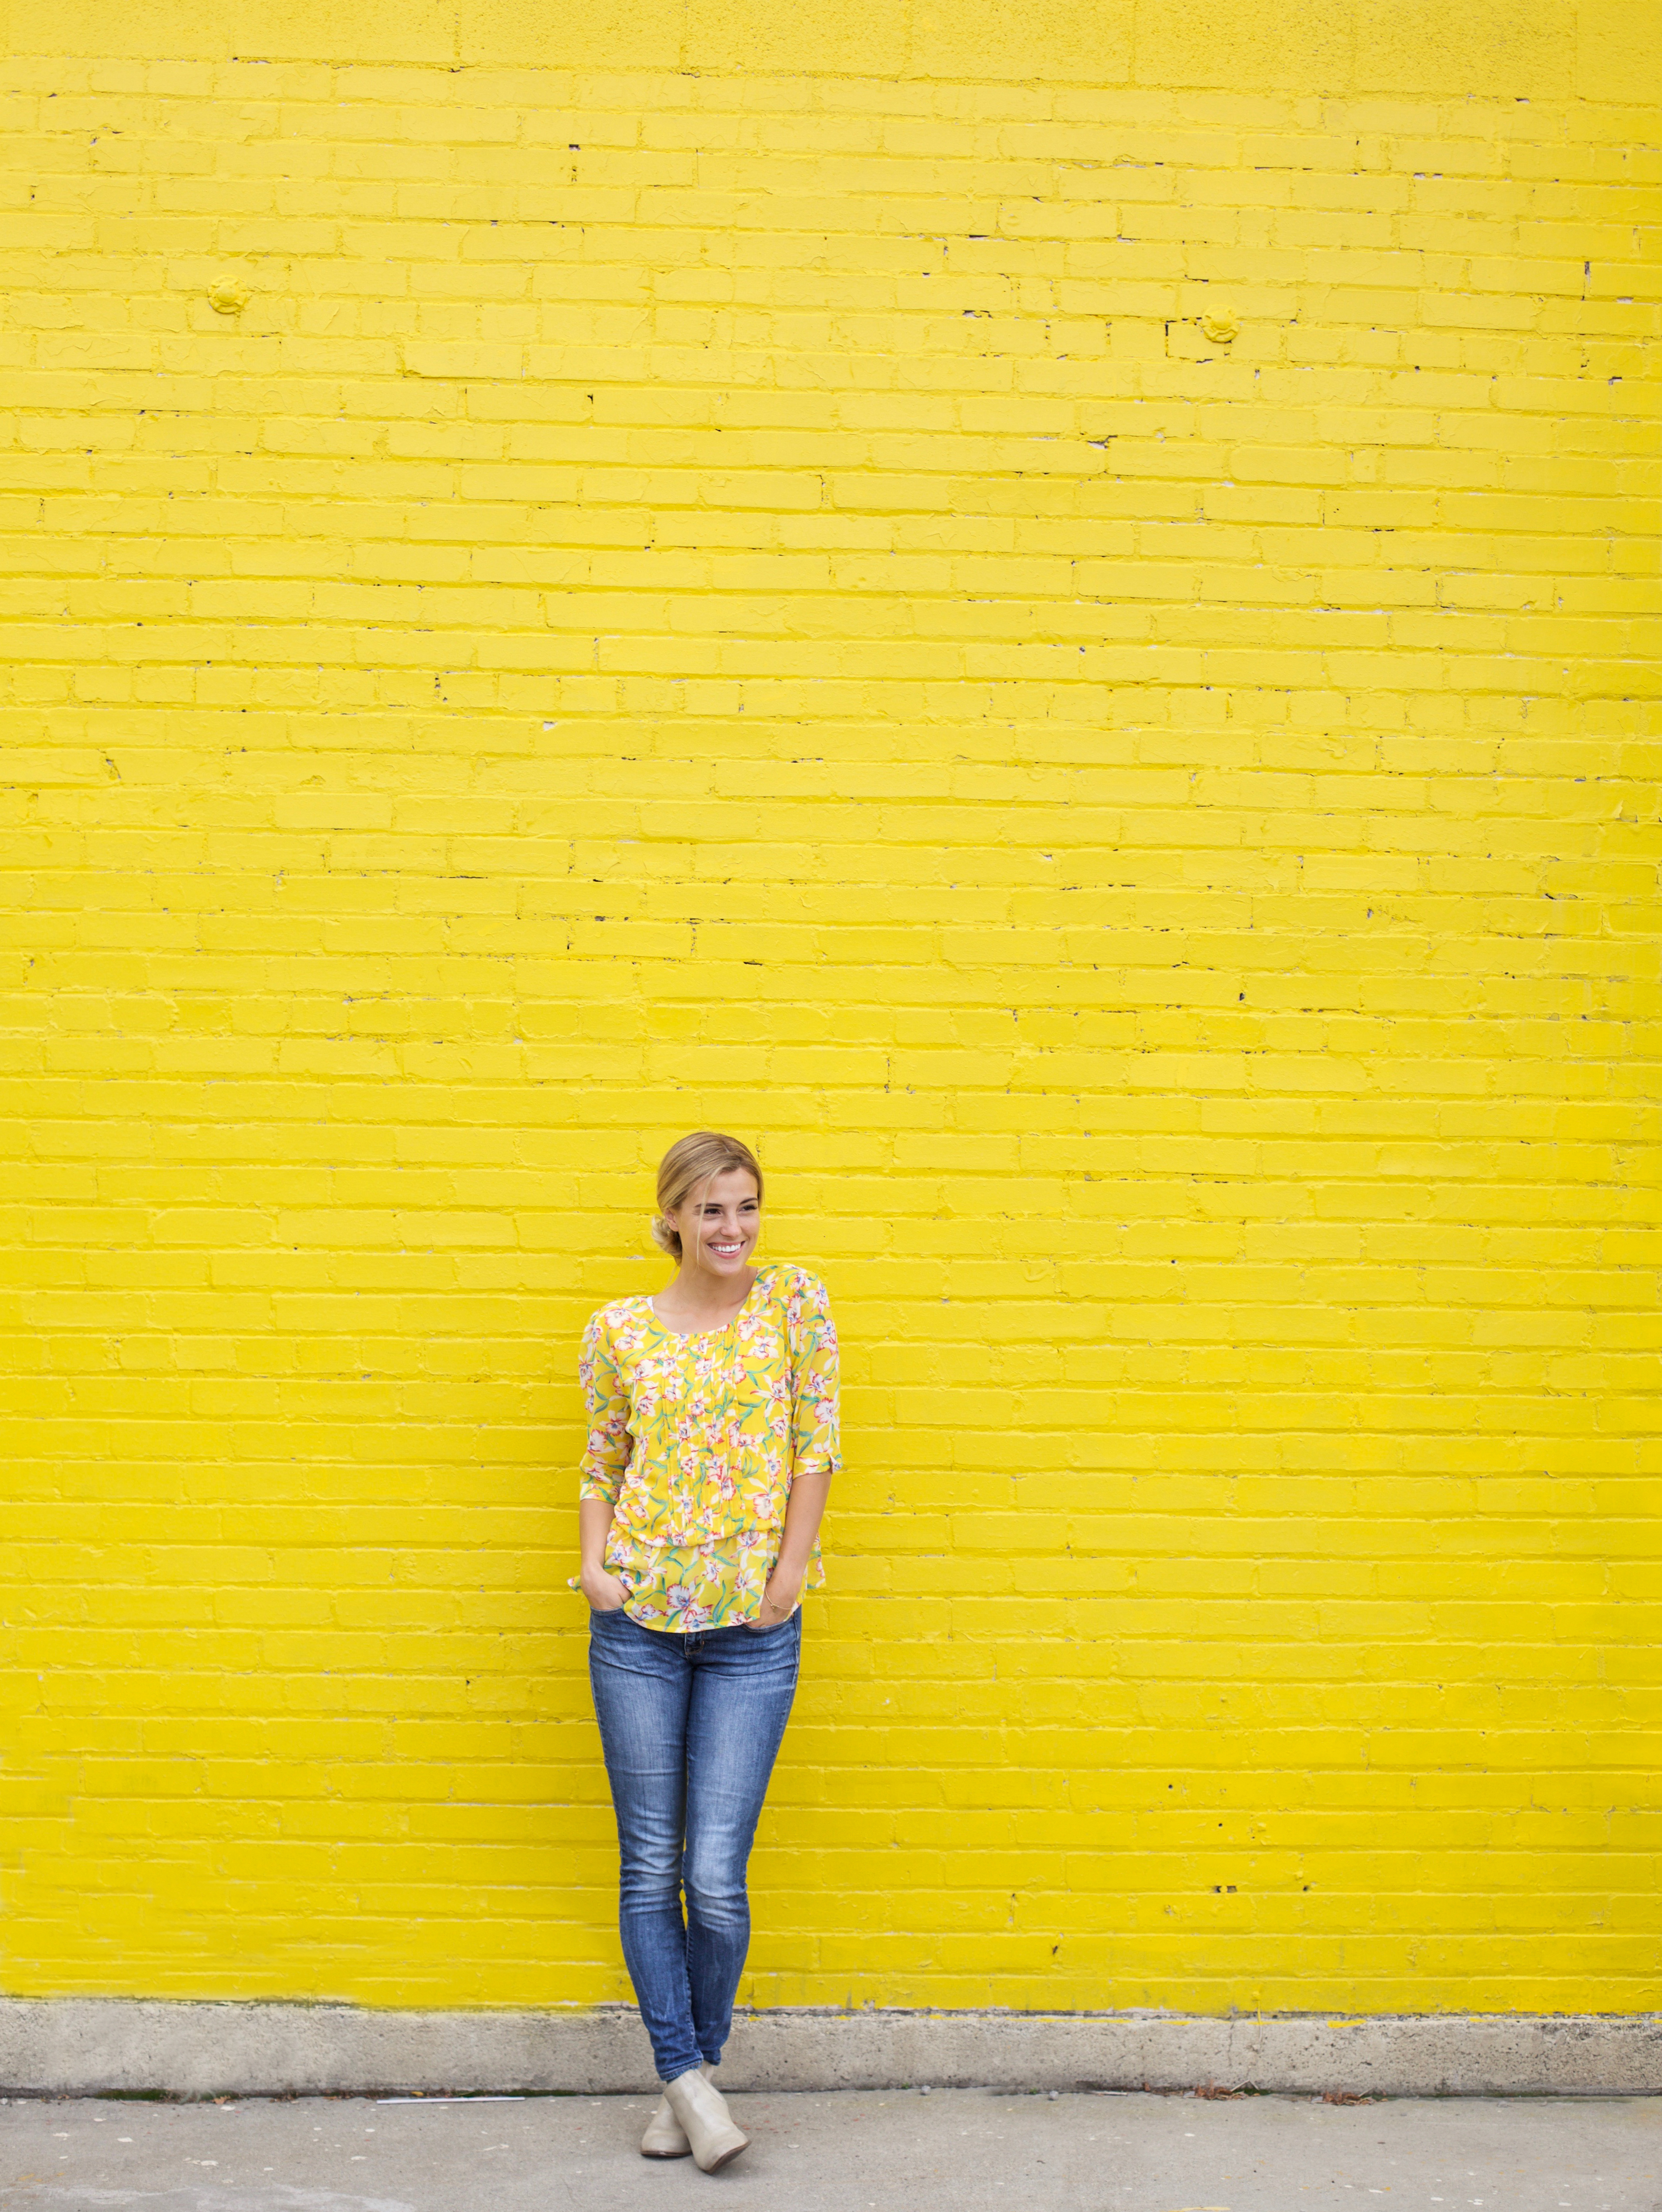 Favorite Colorful Walls in SLC! - Page 3 of 6 - willivia